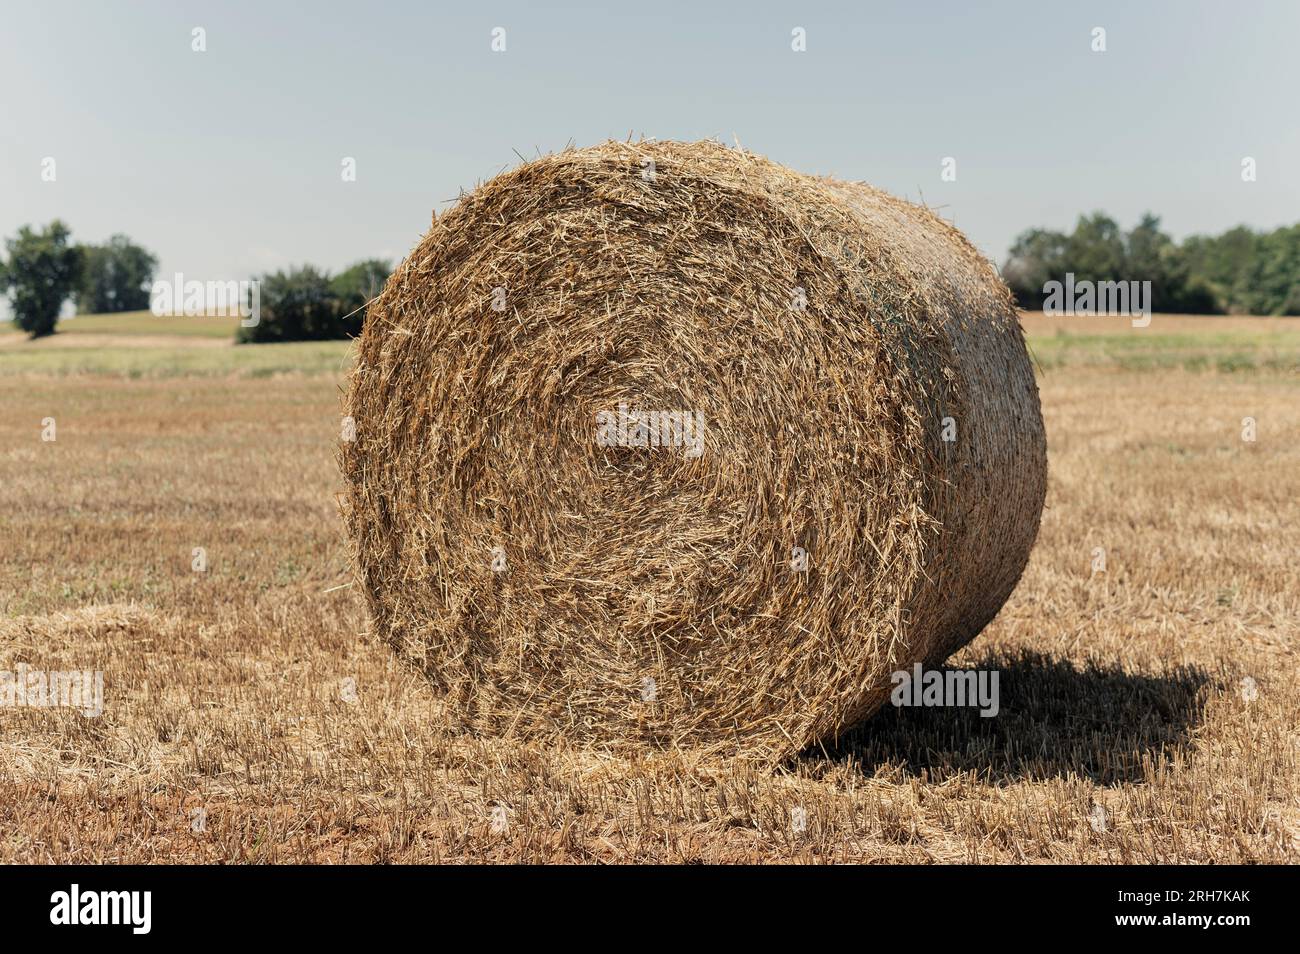 Bale of hay after the grain harvest Stock Photo